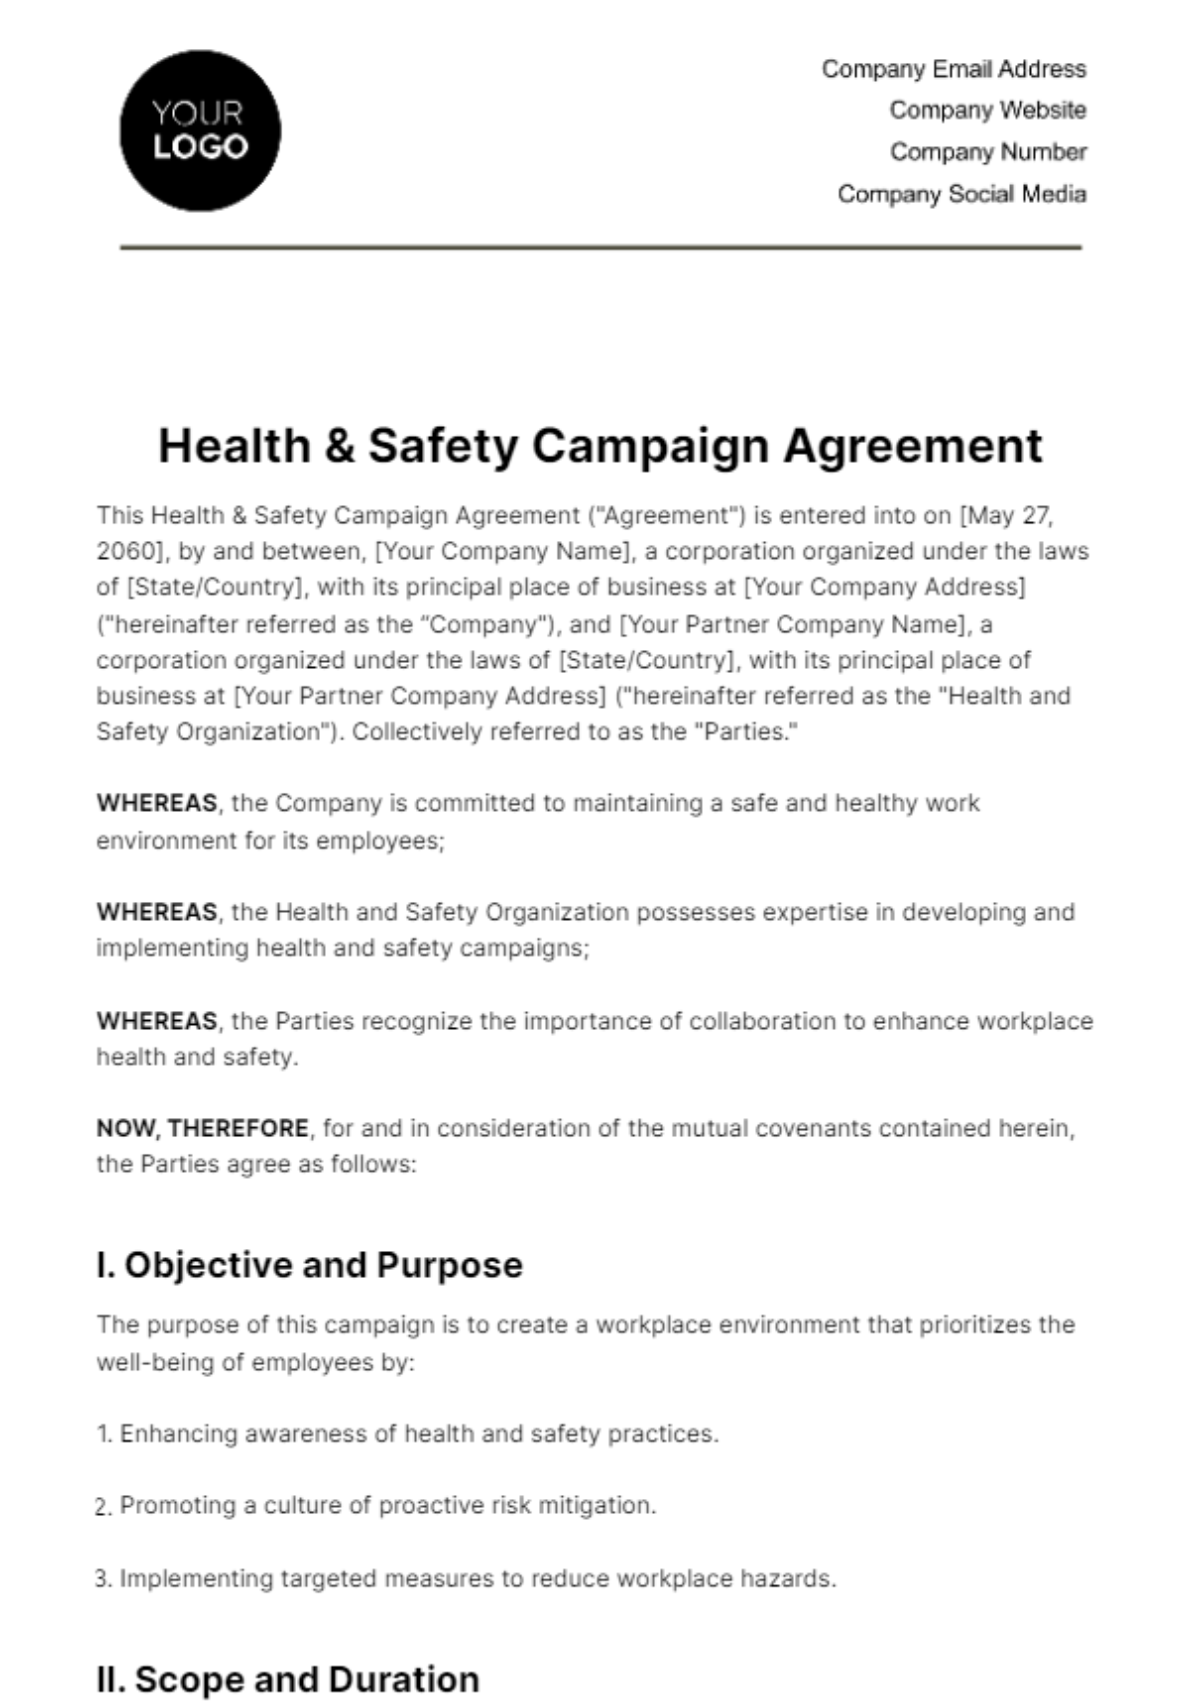 Health & Safety Campaign Agreement Template